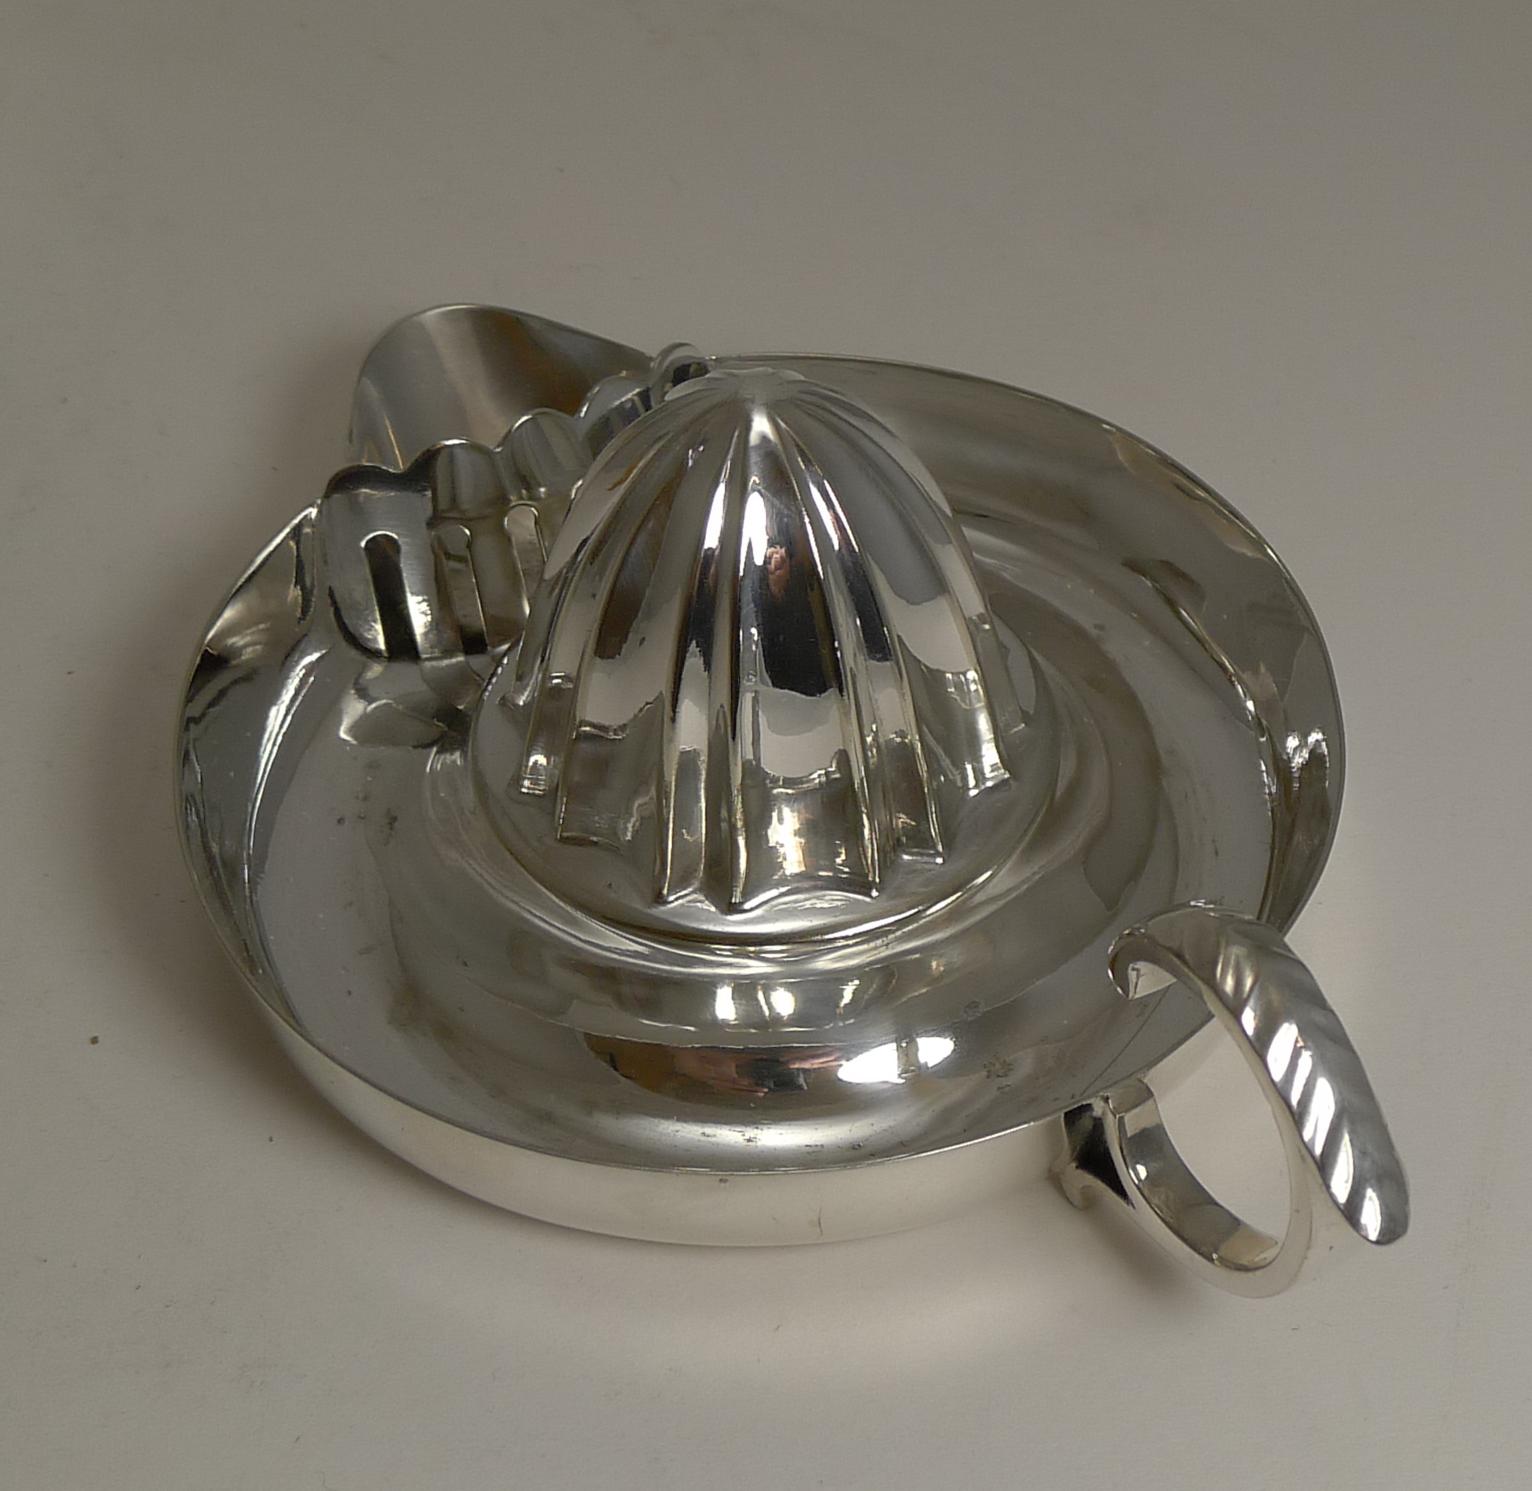 Edwardian Antique English Silver Plated Lemon Squeezer / Reamer by Daniel and Arter